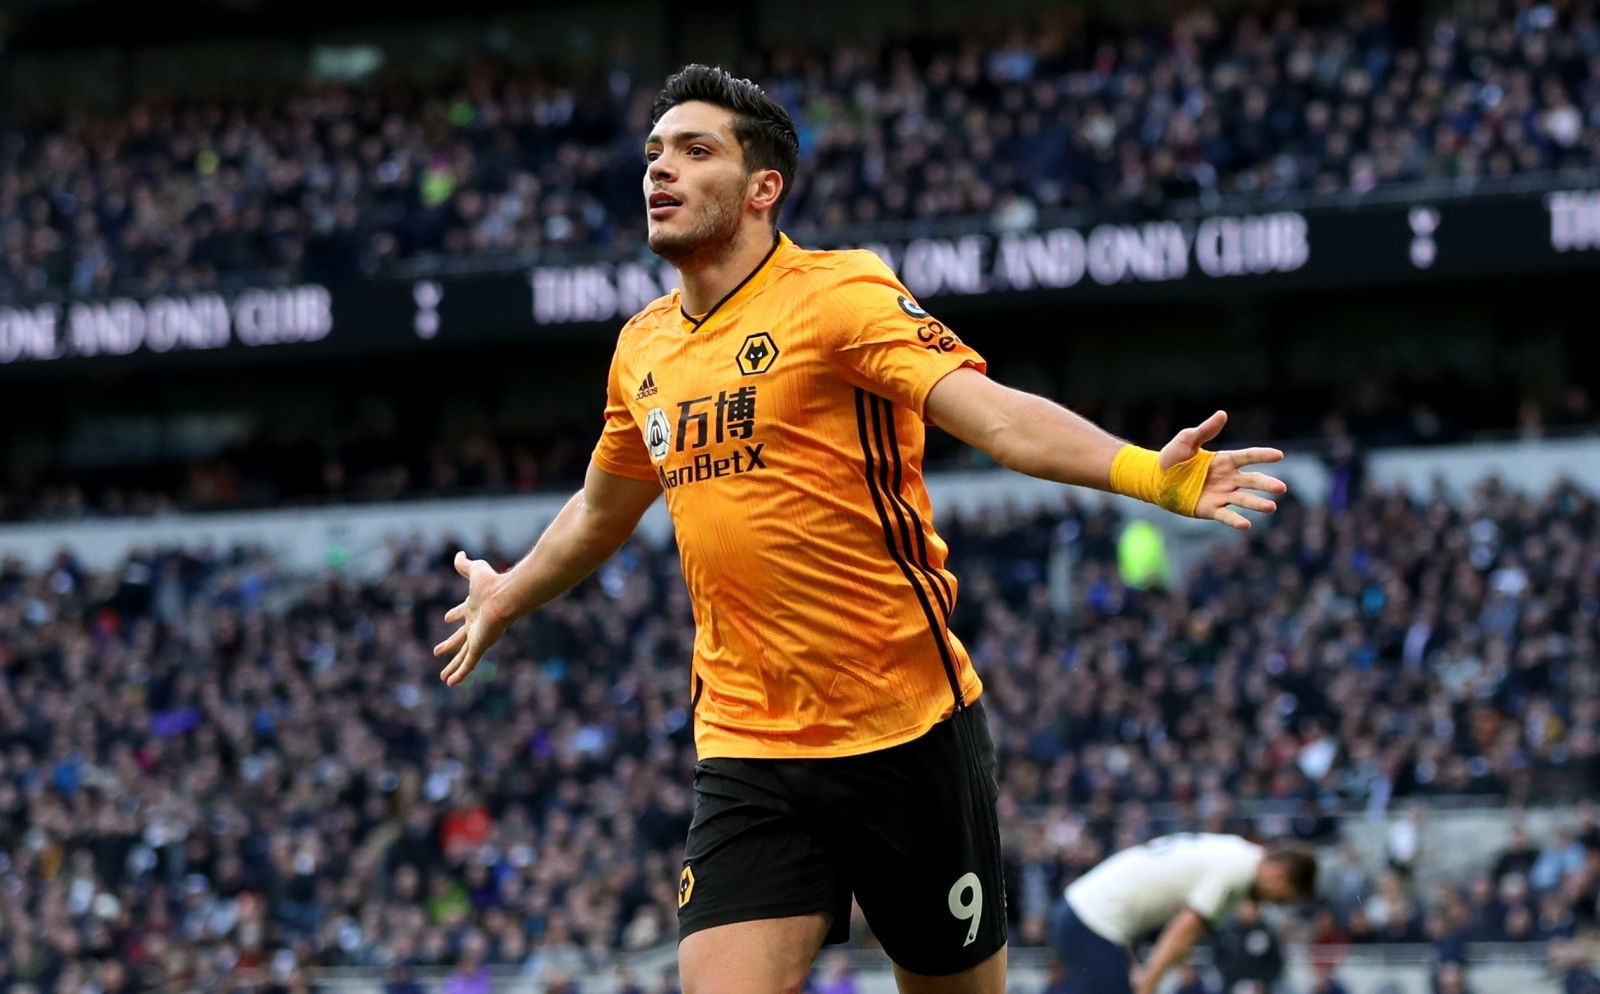 The Mexican striker Raul Jimenez was happy at his new club at the moment.